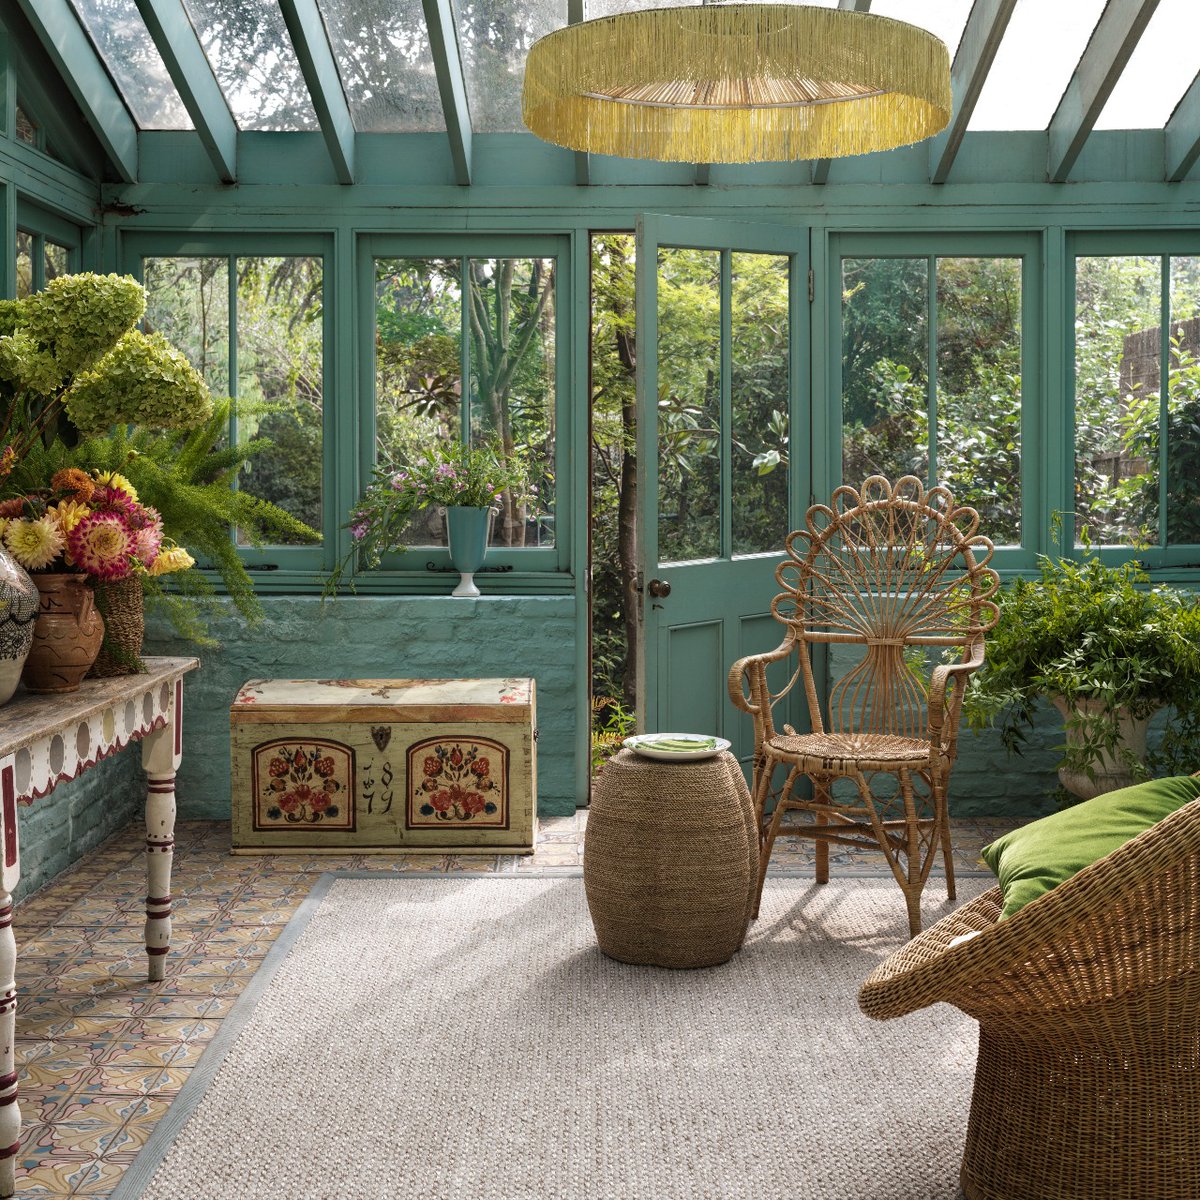 Reimagine your conservatory interiors with @CrucialTrading Sisool Masai collection and bring the outdoors indoors 🌱 🌾 
For more info:
bit.ly/3qebP9j